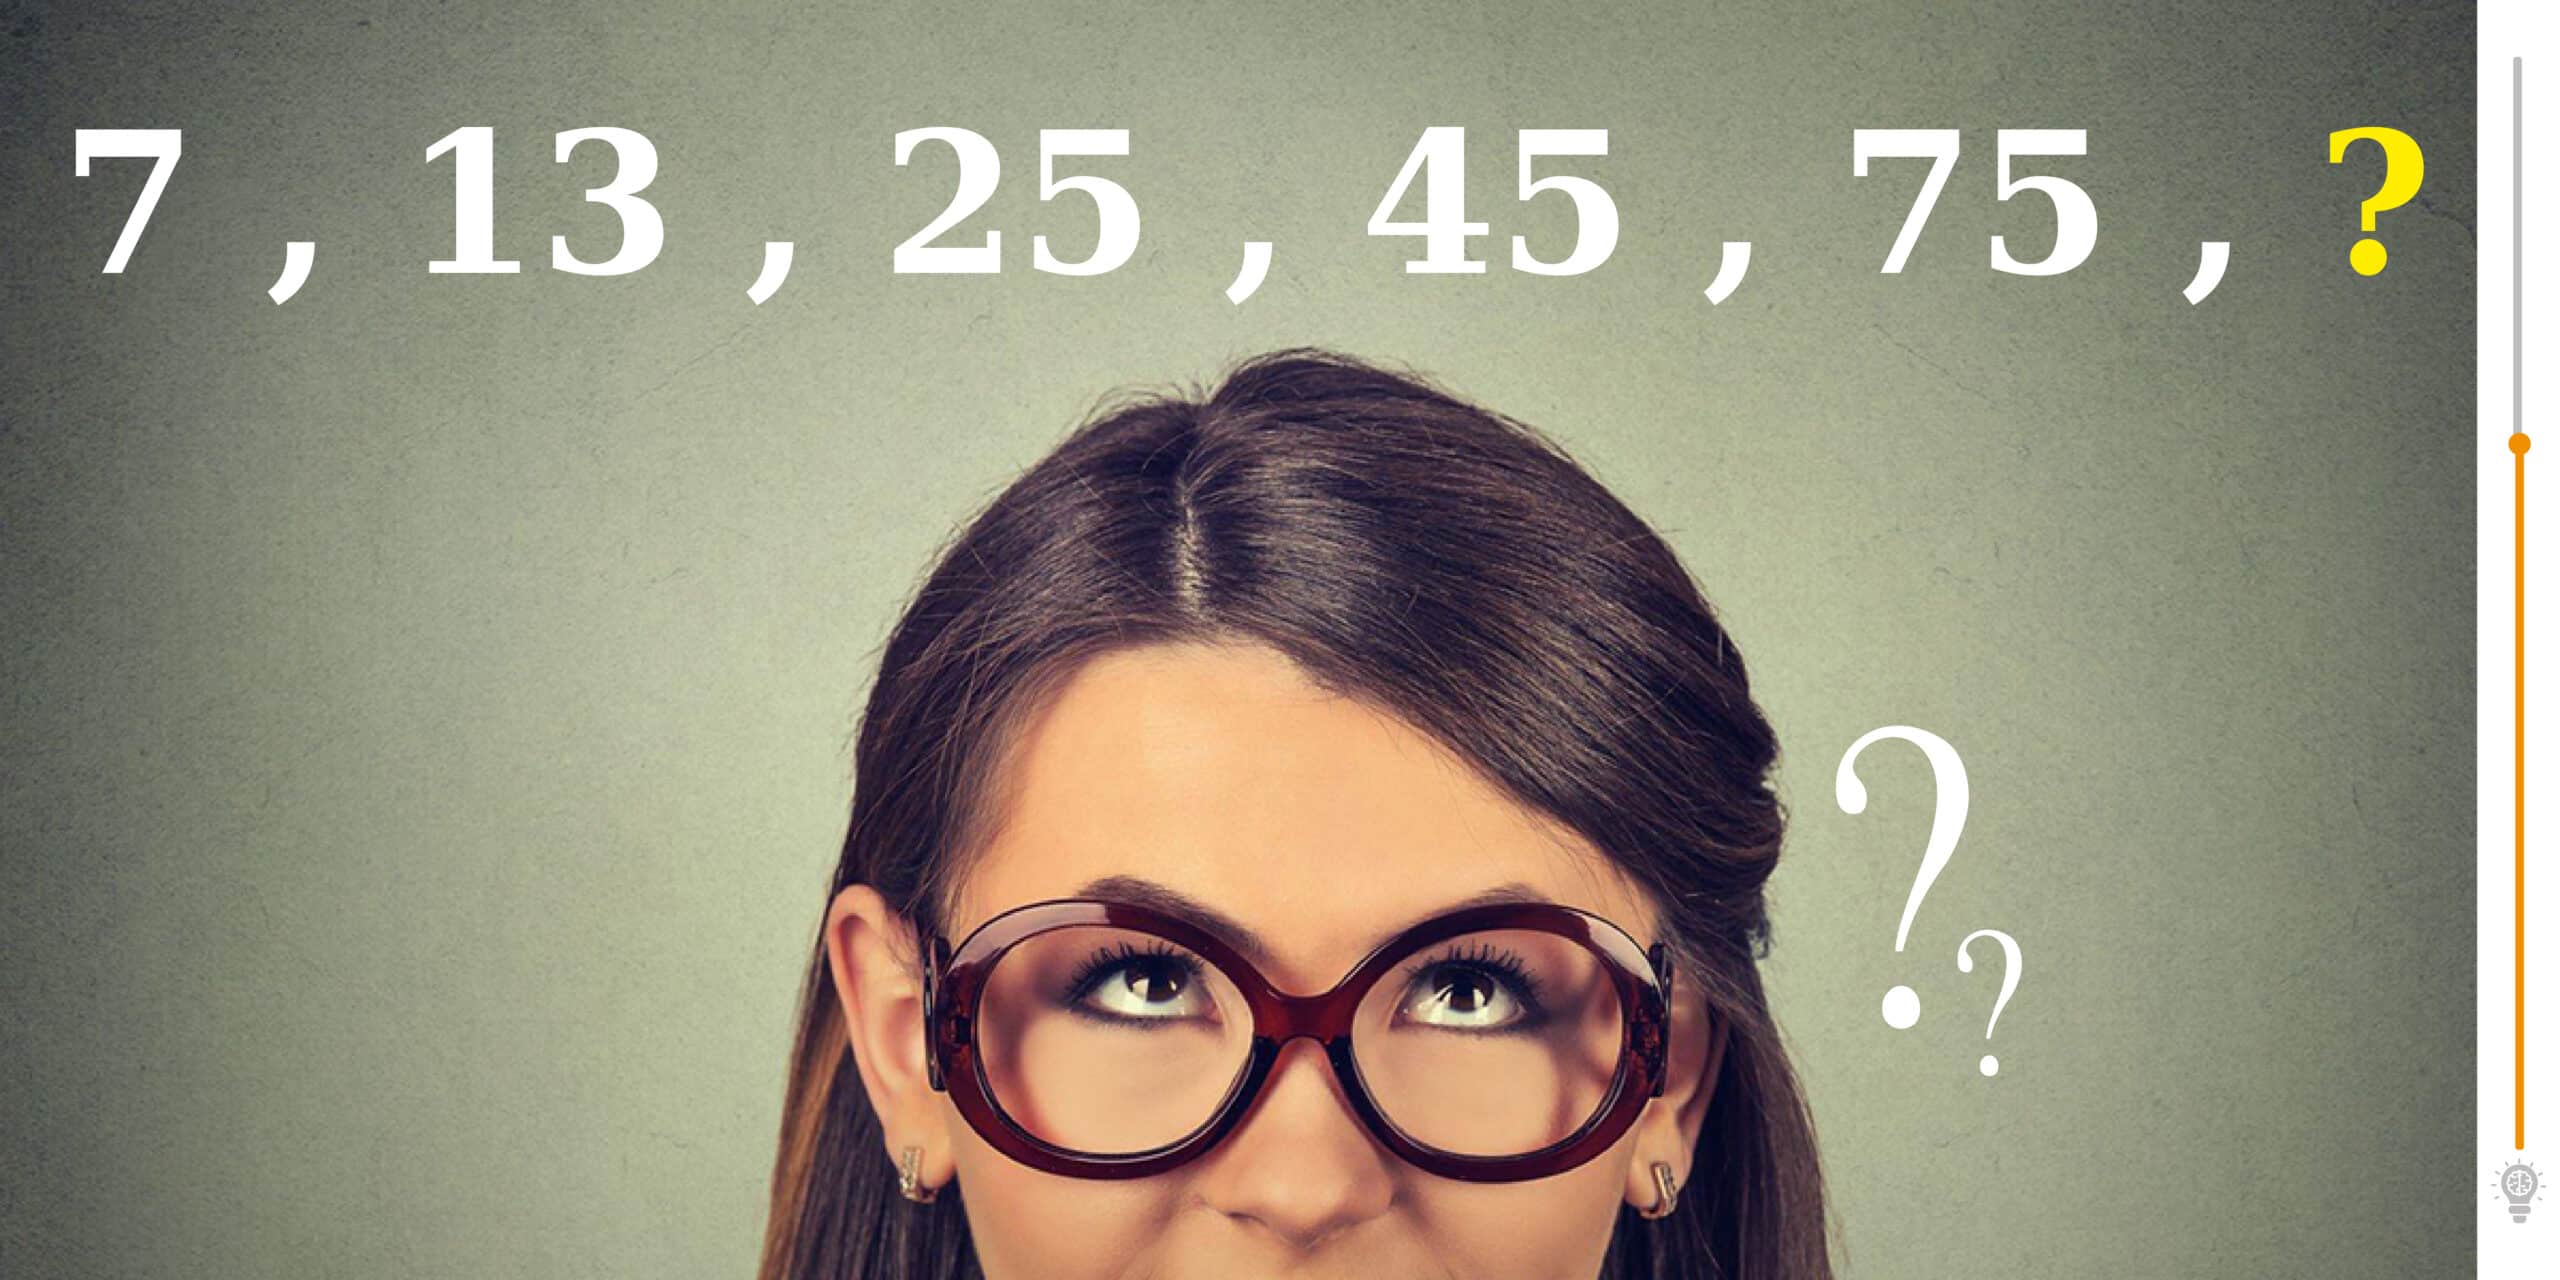 IQ Test: Is it possible for you to find the next number?